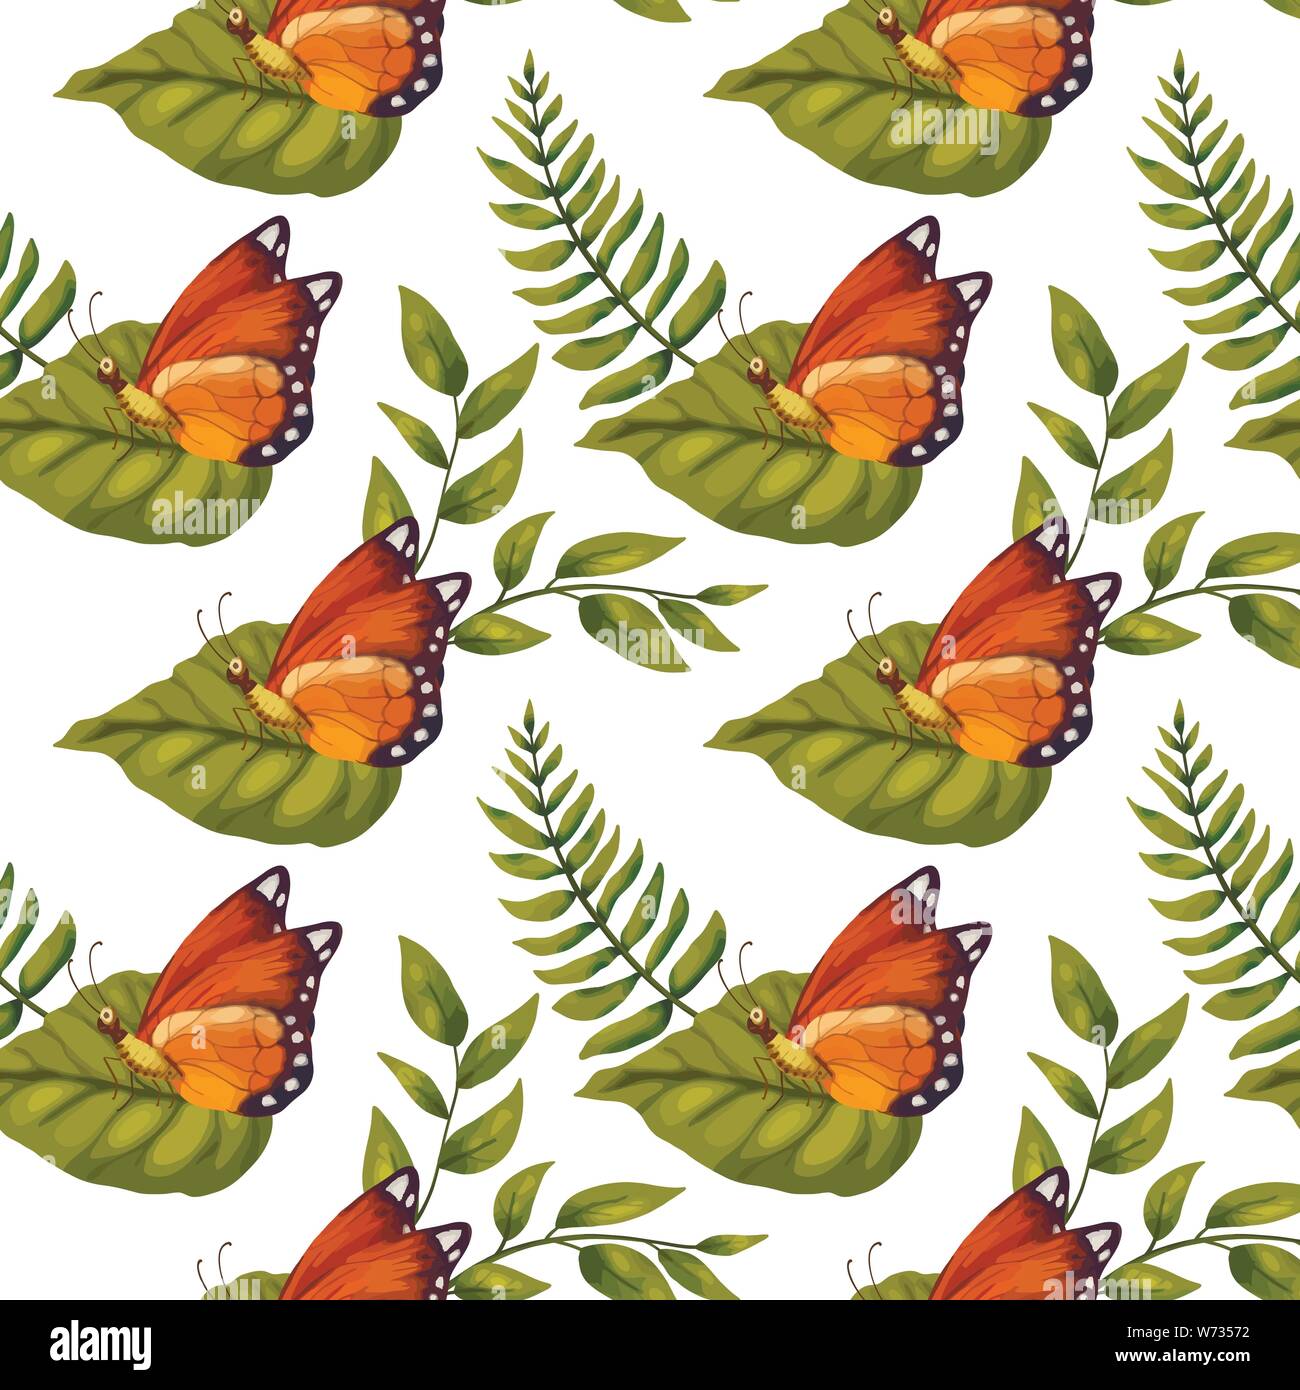 Seamless Vector Pattern With Cute 3d Insect Illustration With